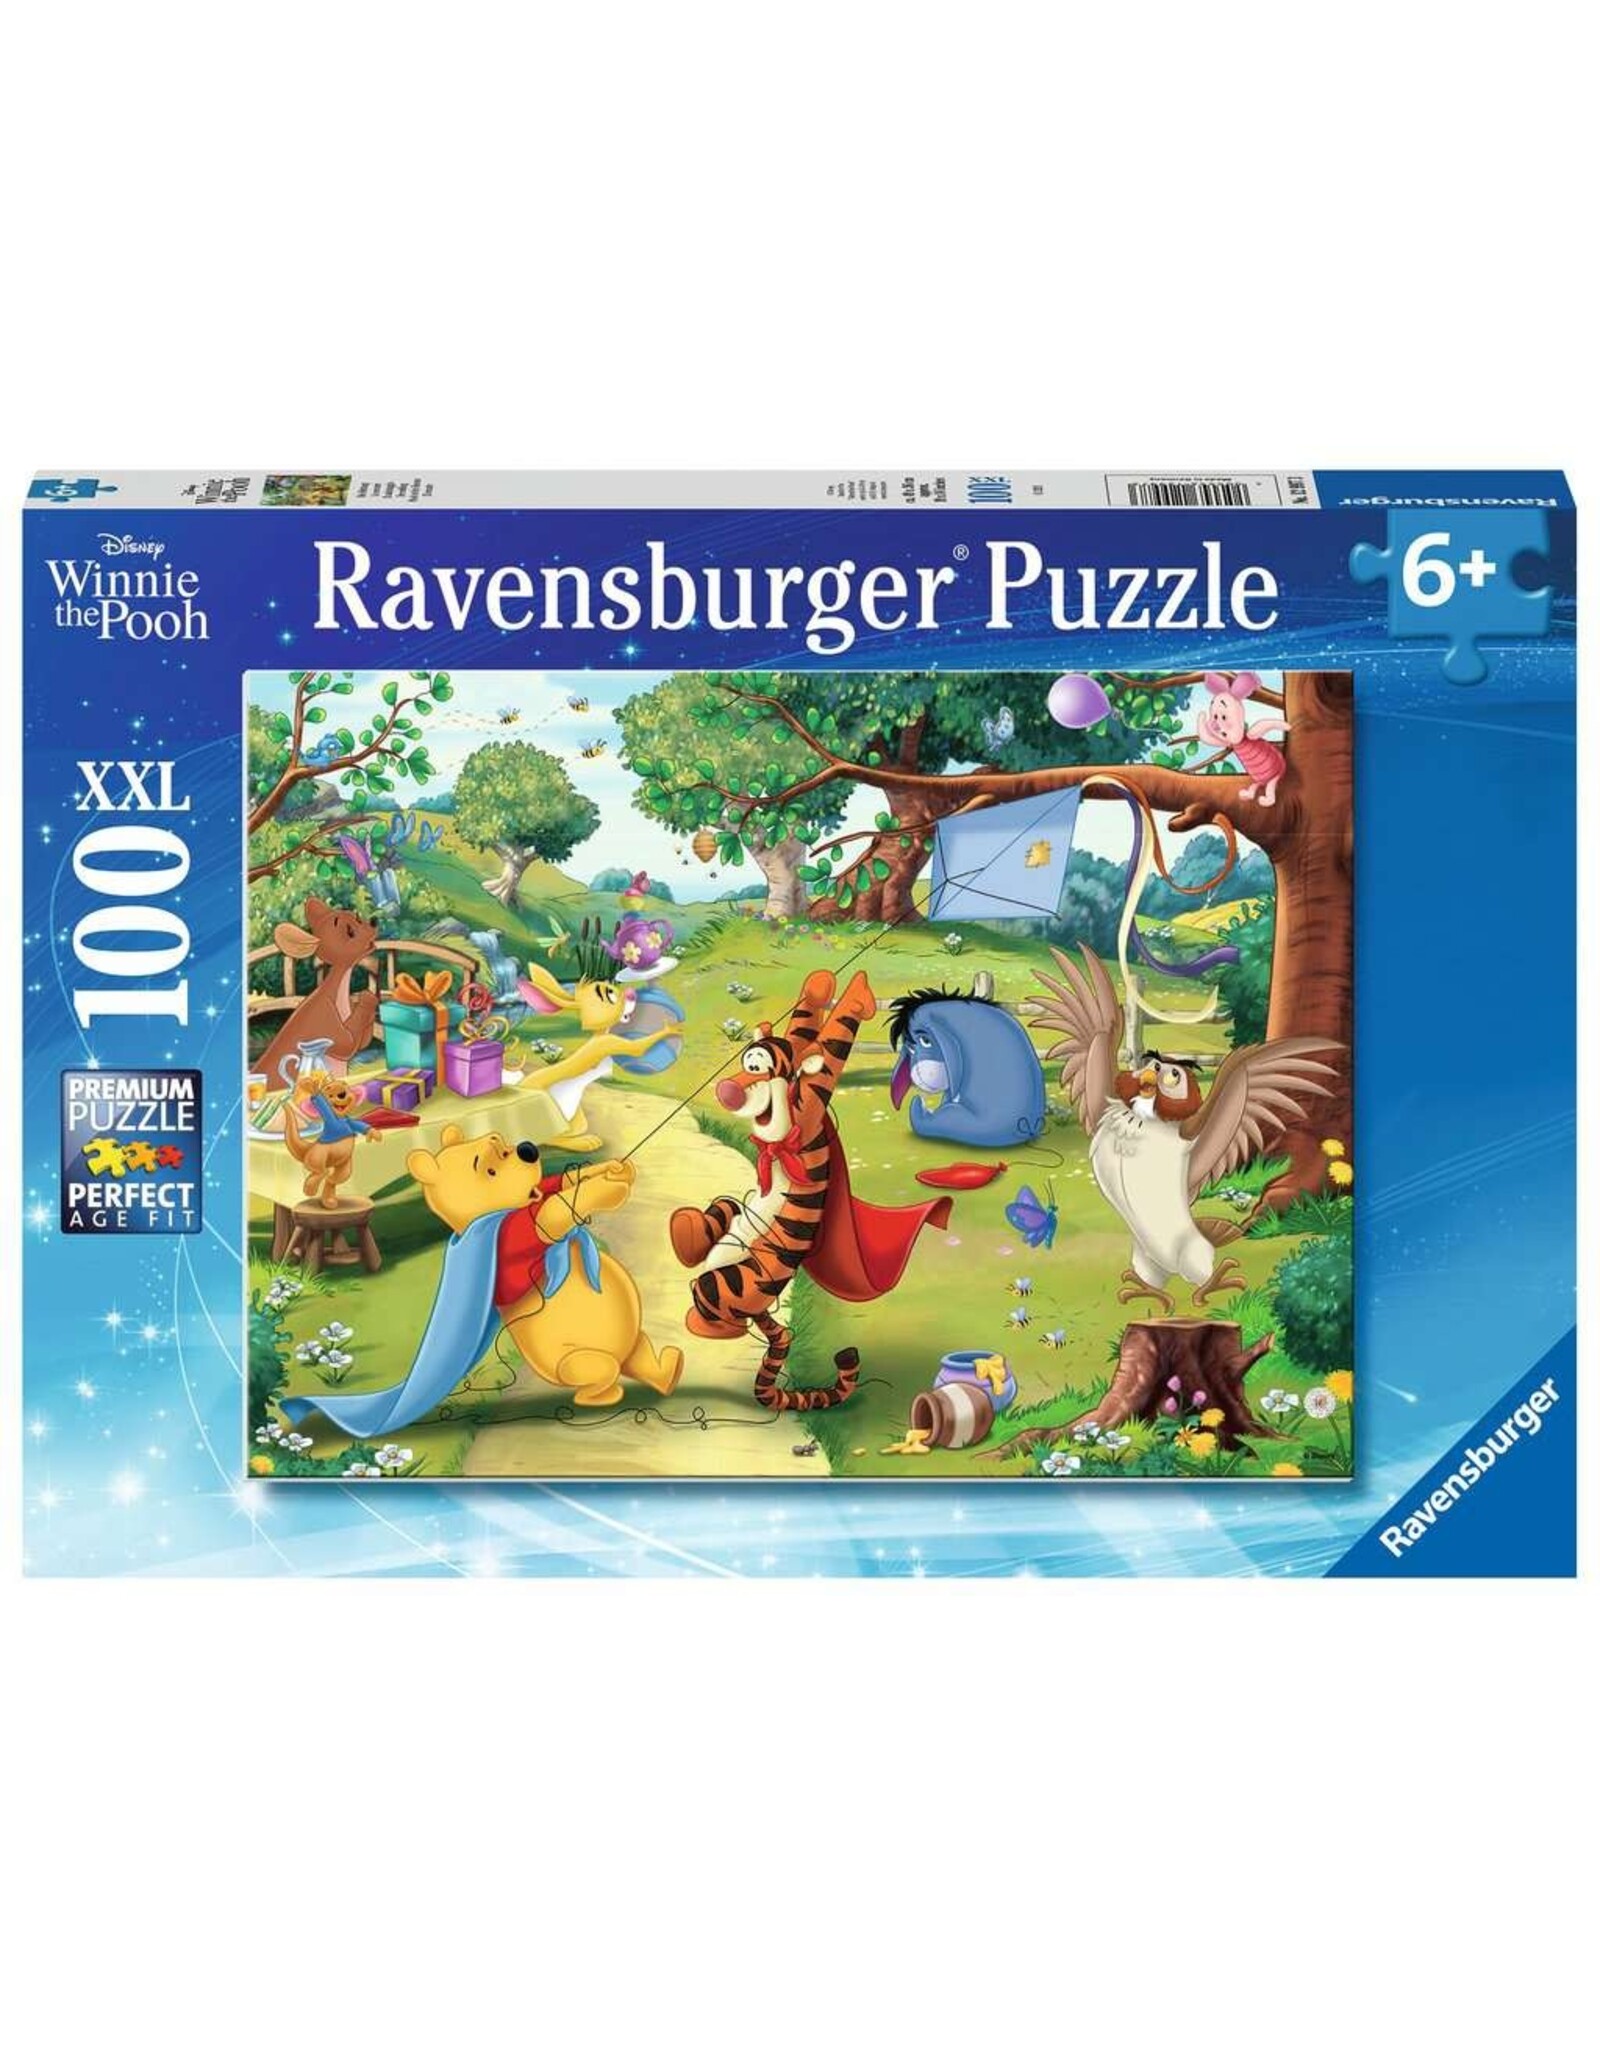 Pooh to the Rescue 100 pc Puzzle